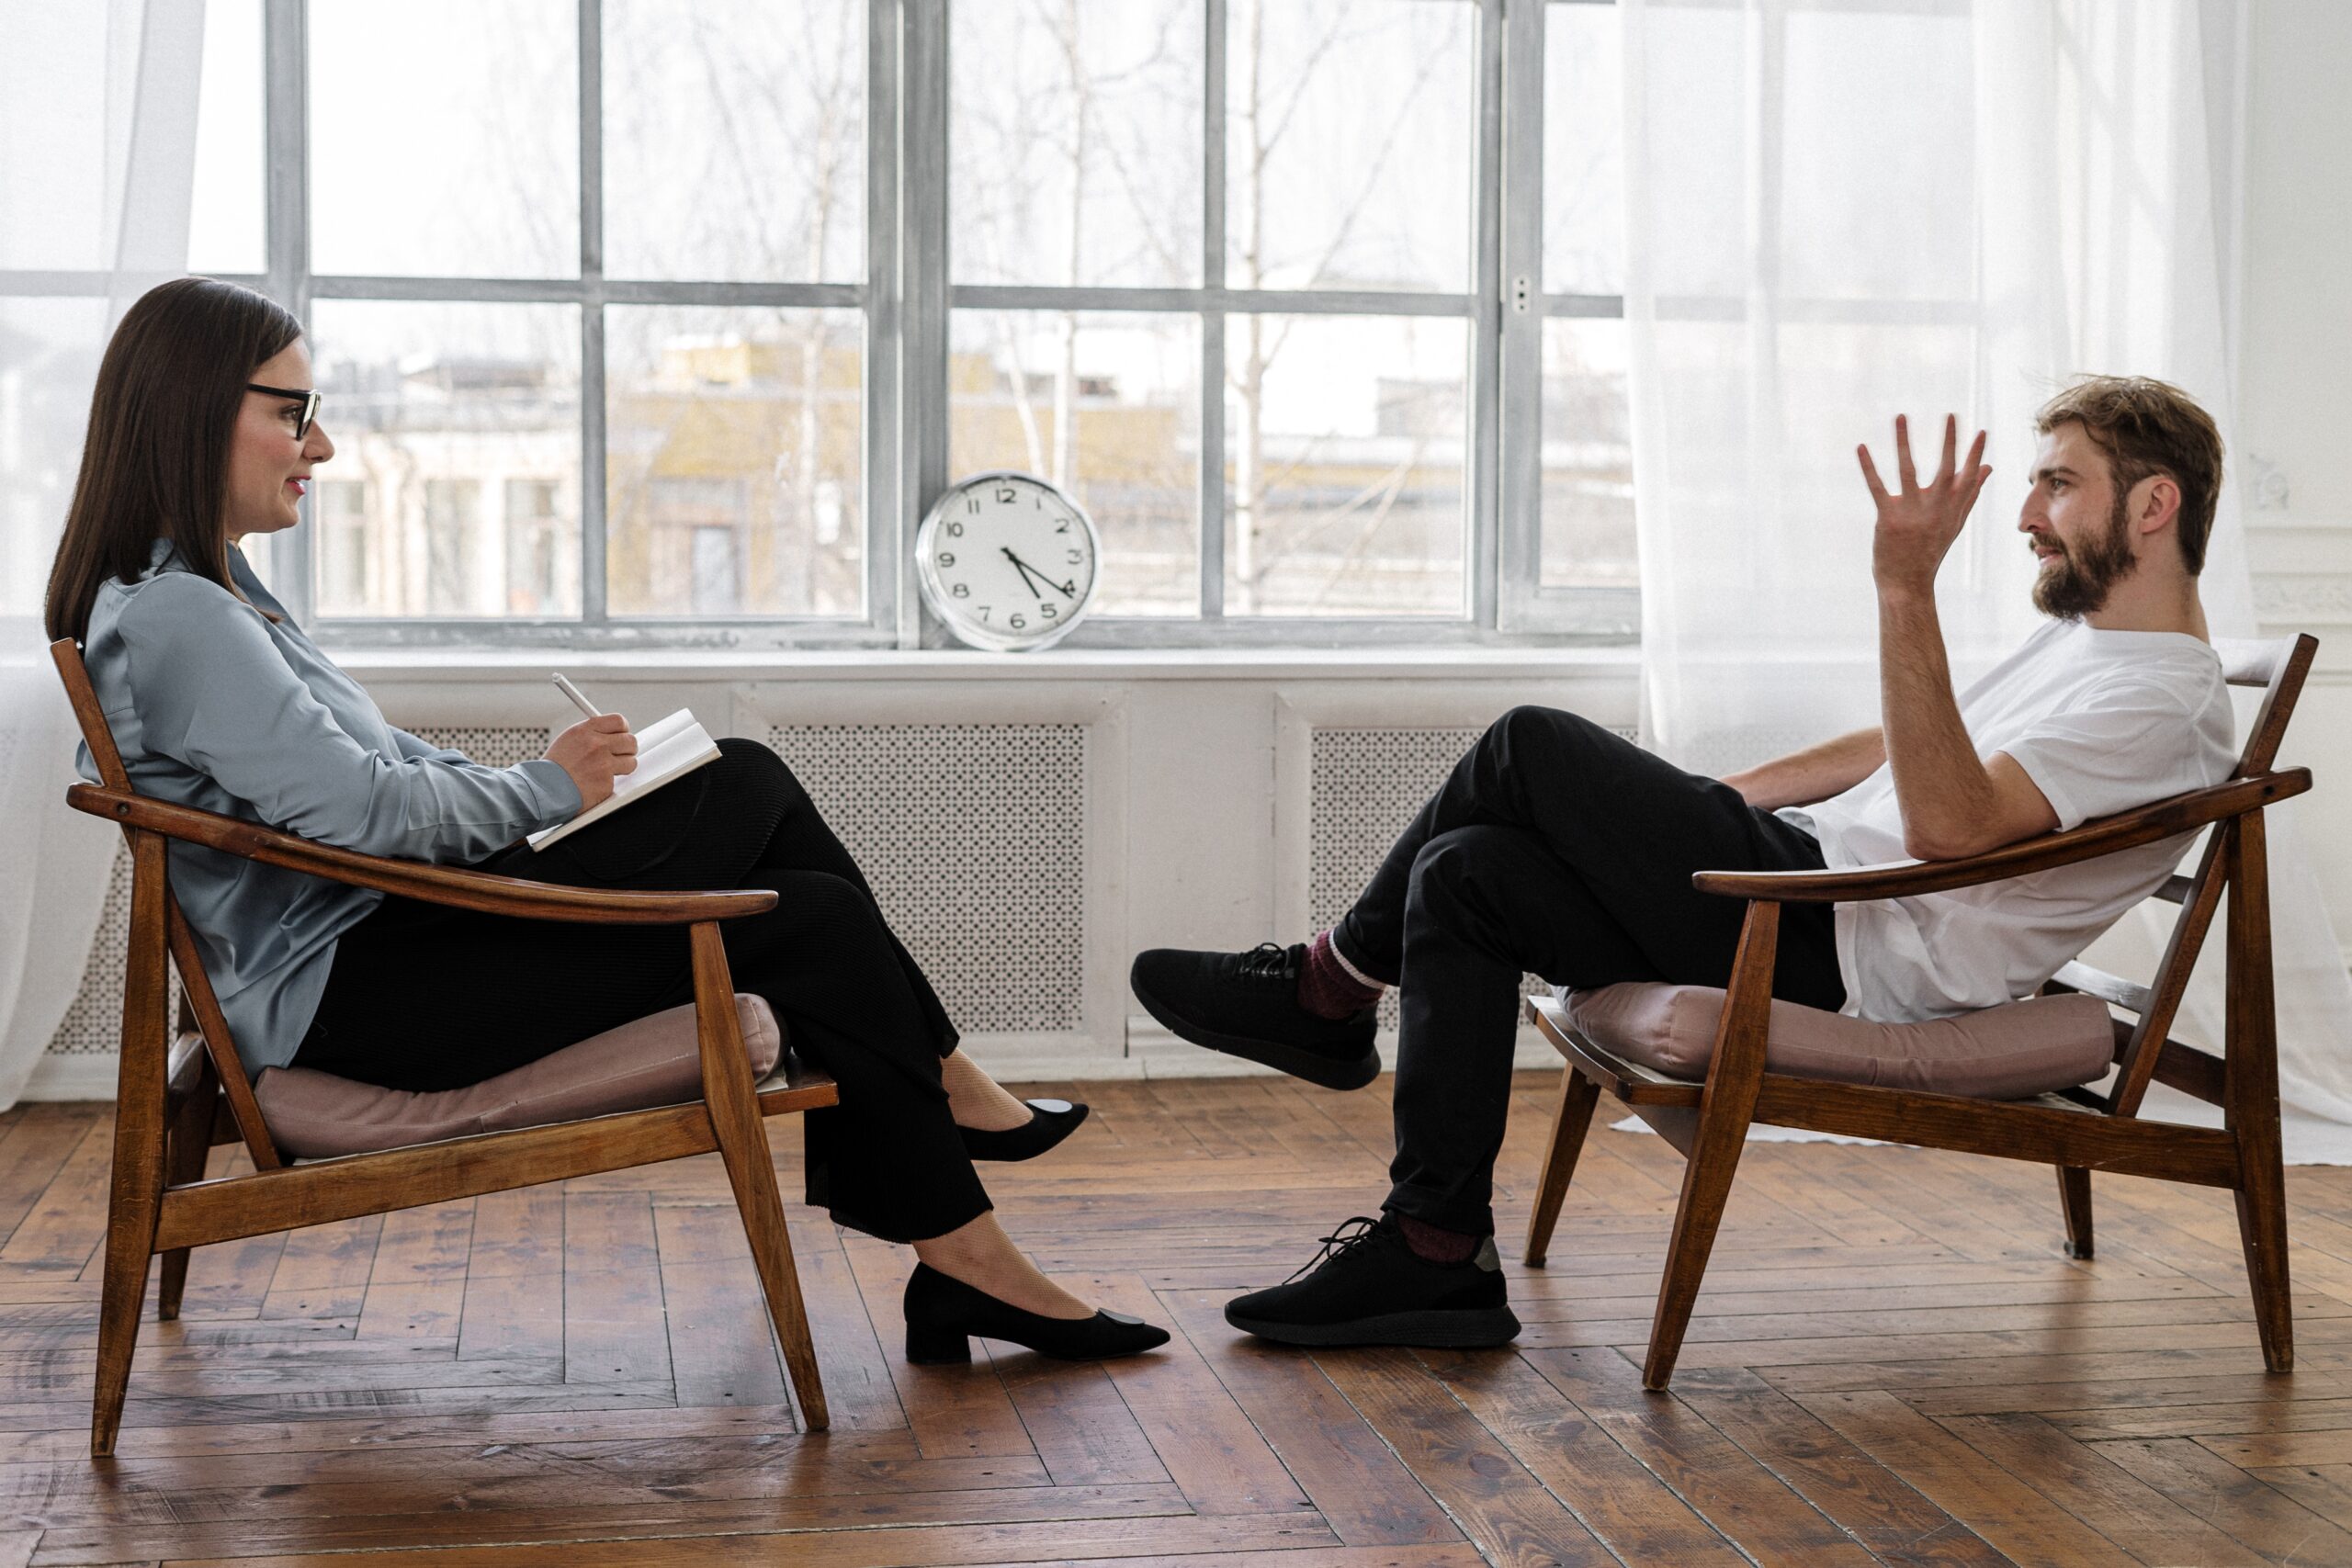 A man sitting right across his therapist in a mostly empty room with an old wooden floor.